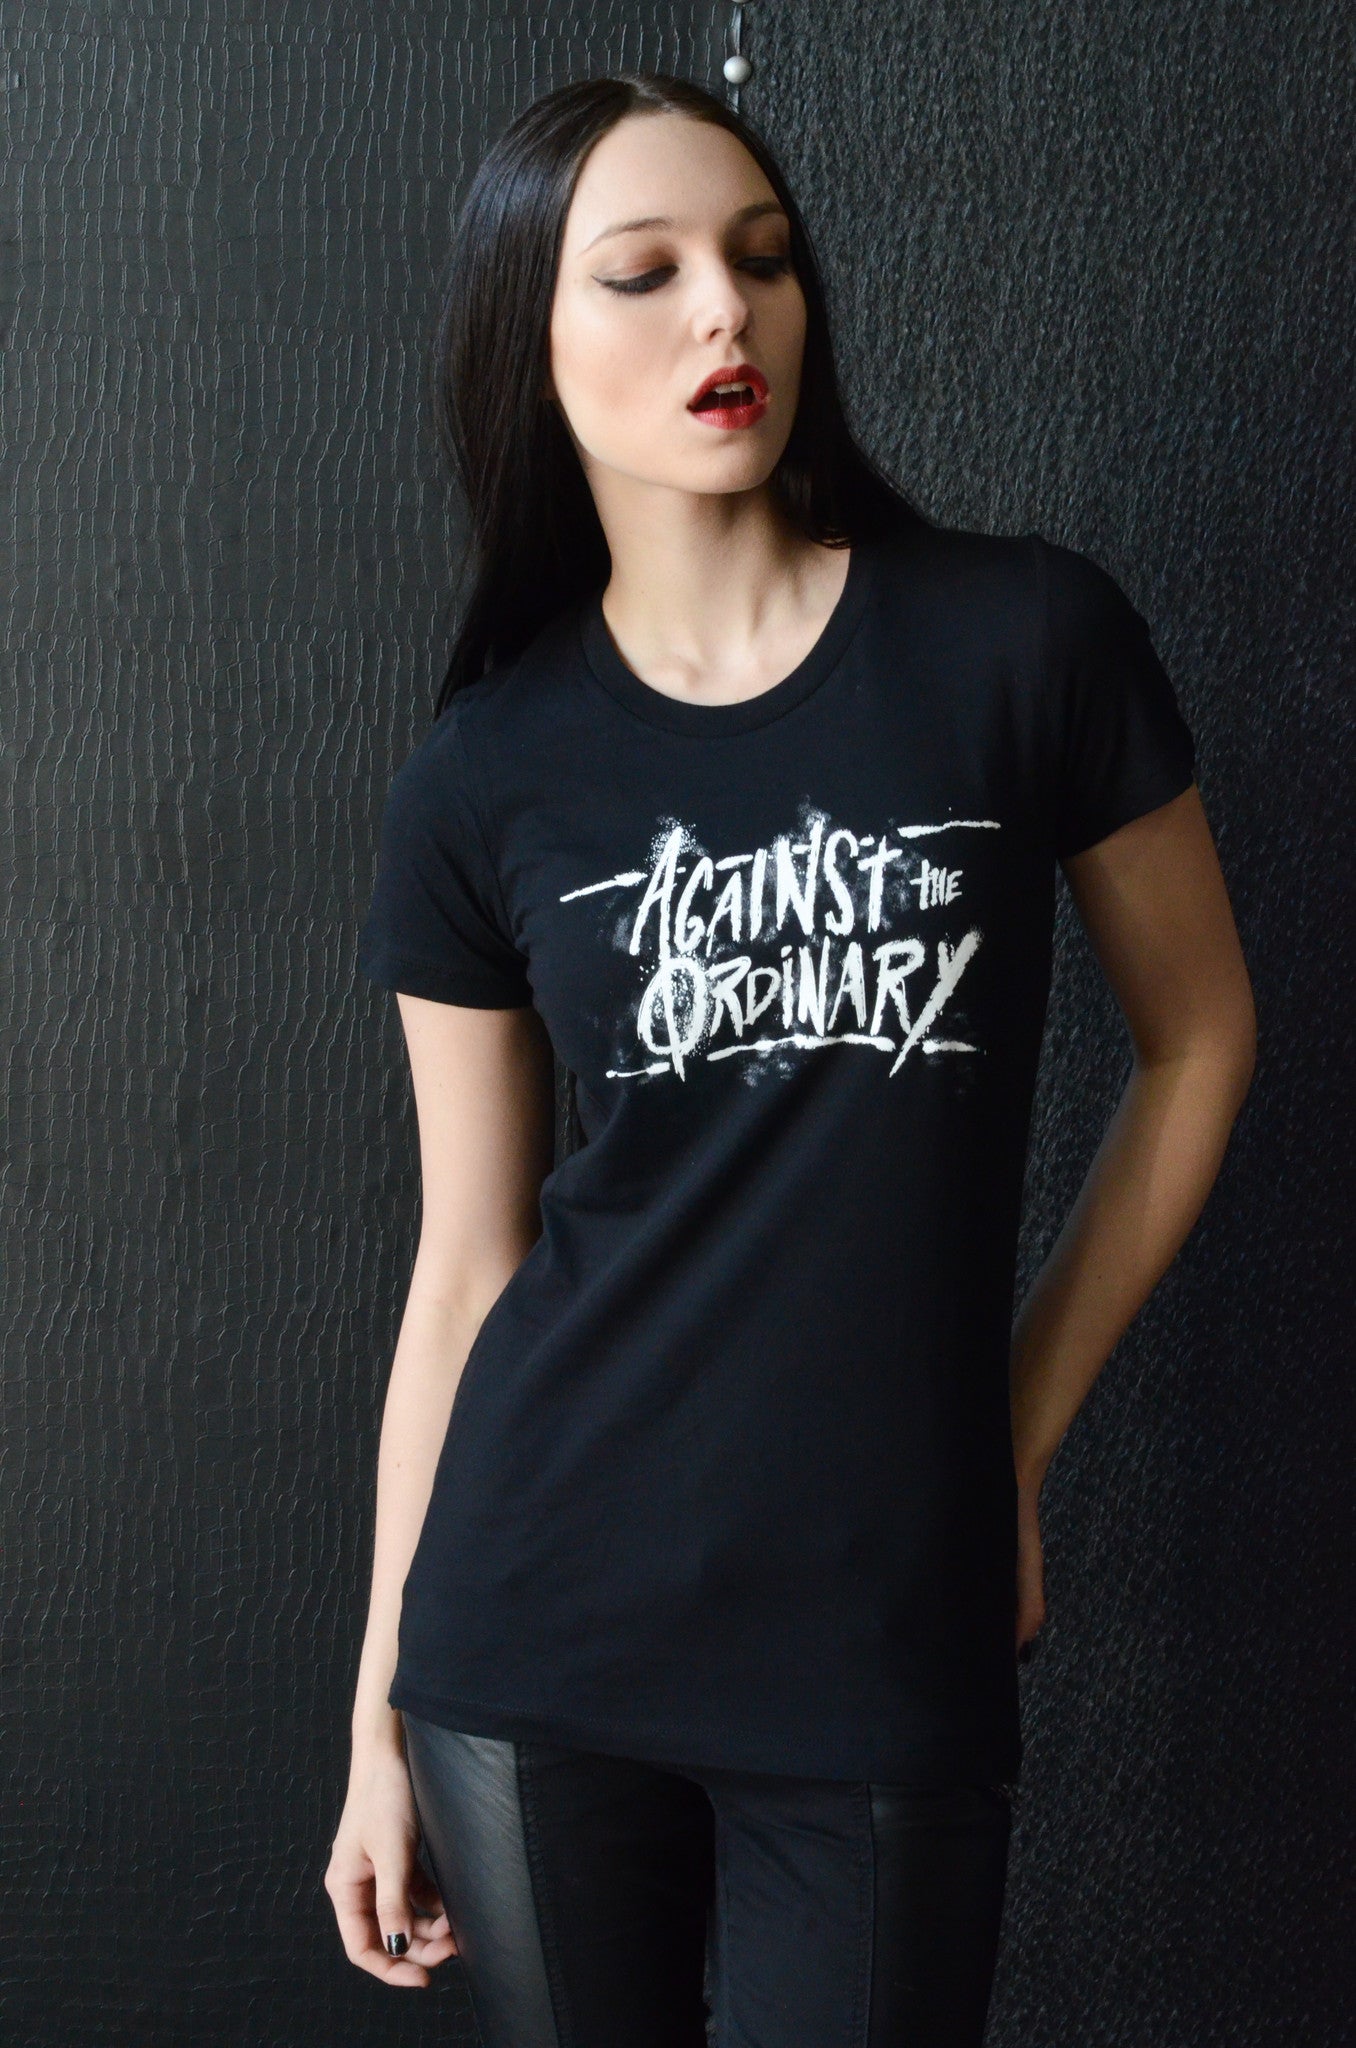 AGAINST THE ORDINARY Women's Band TEE